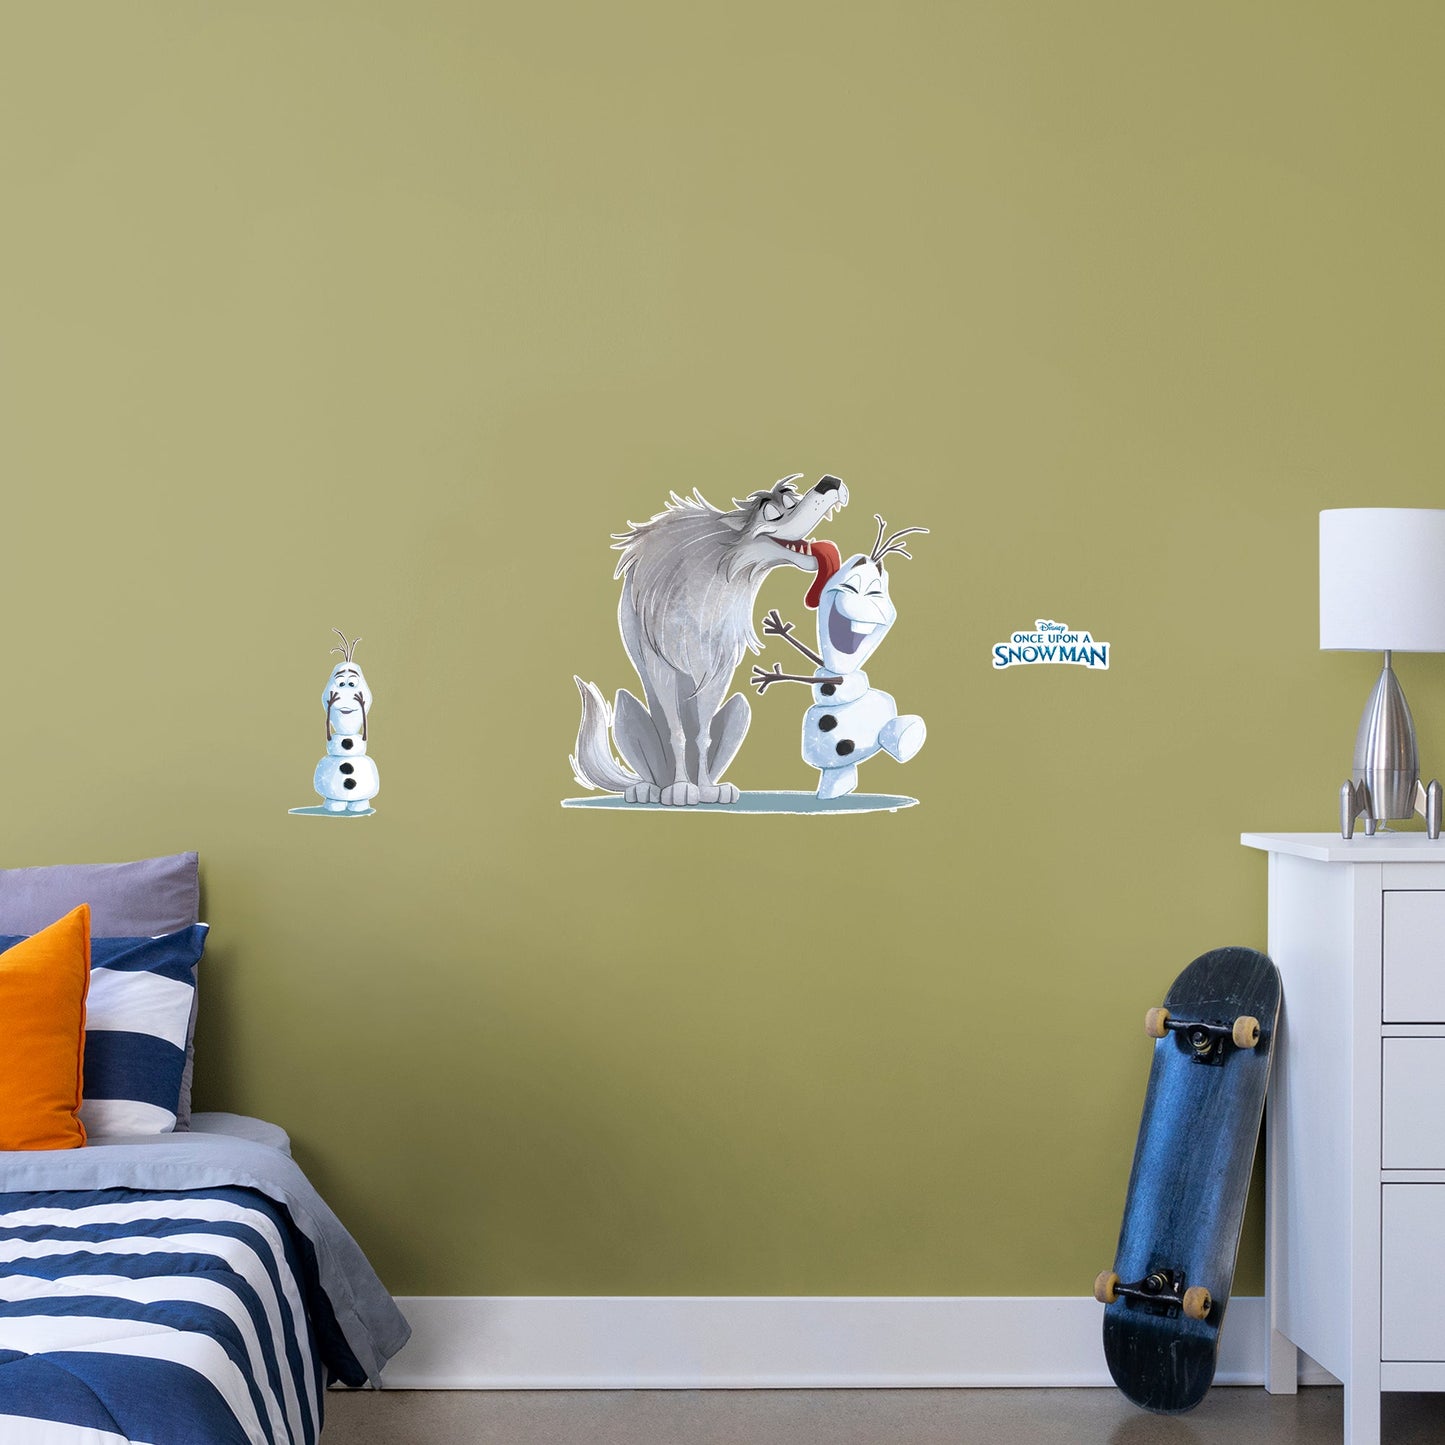 Olaf: Wolf - Once Upon A Snowman Officially Licensed Disney Removable Wall Decal